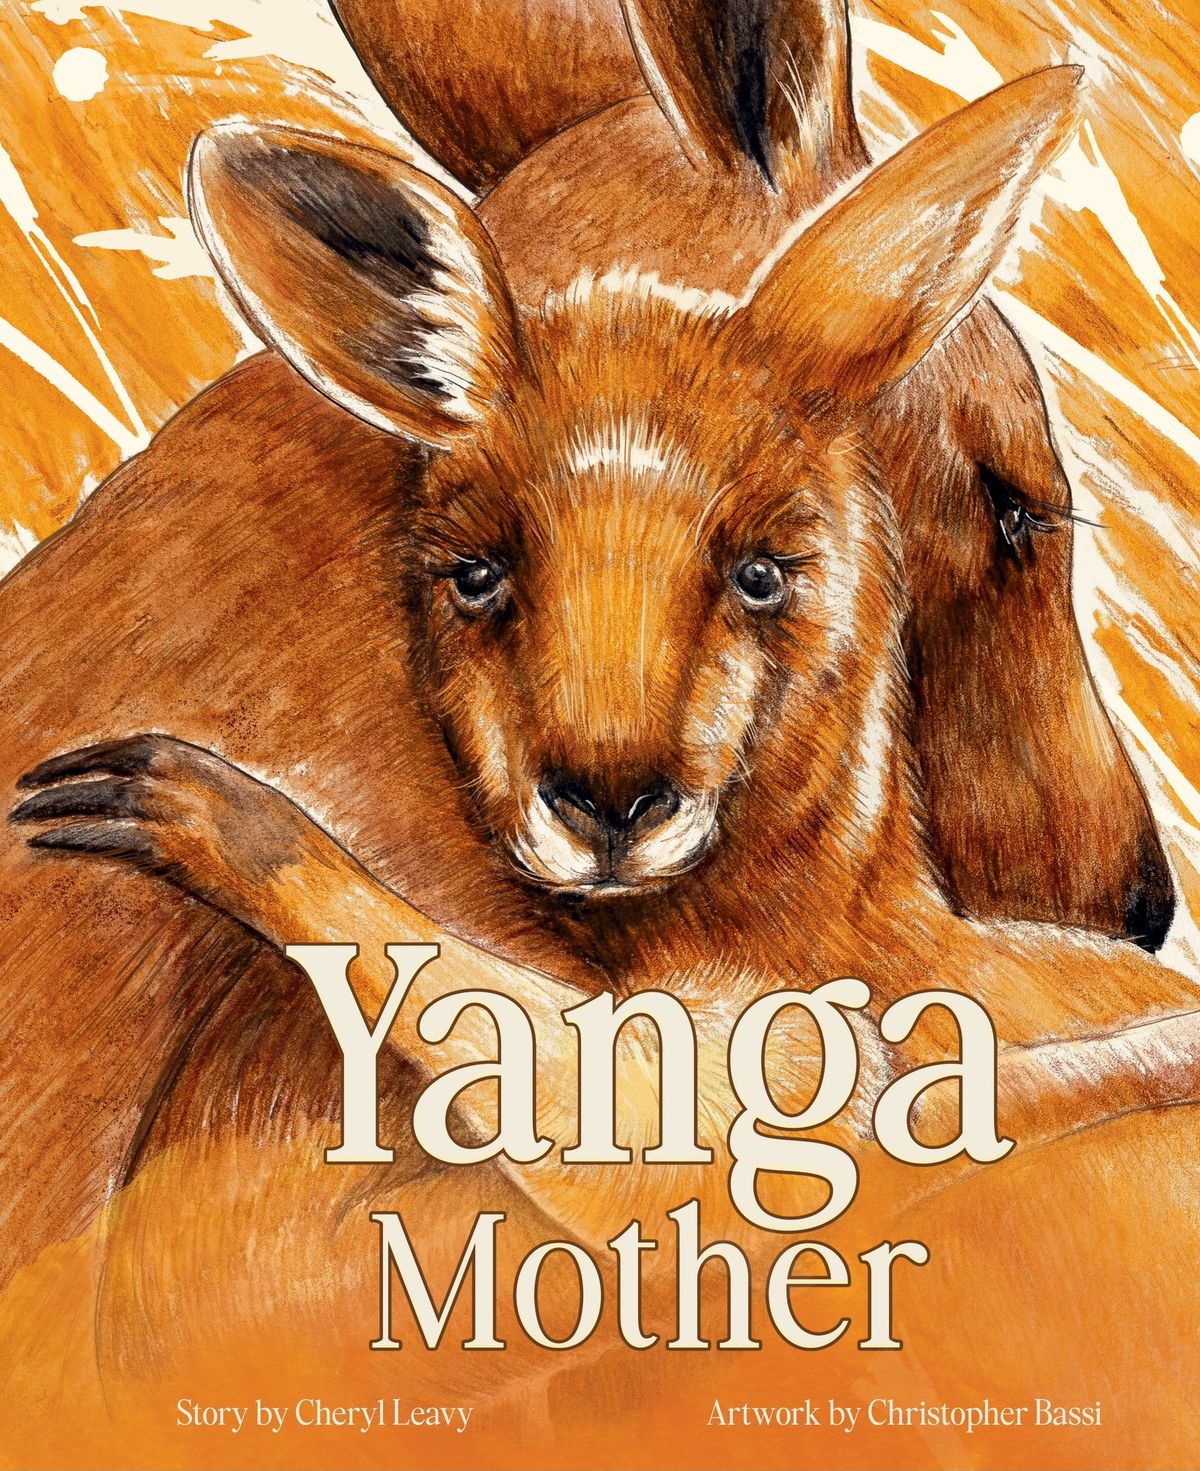 Yanga Mother - Cheryl Leavy and Christopher Bassi in conversation with Judy Watson